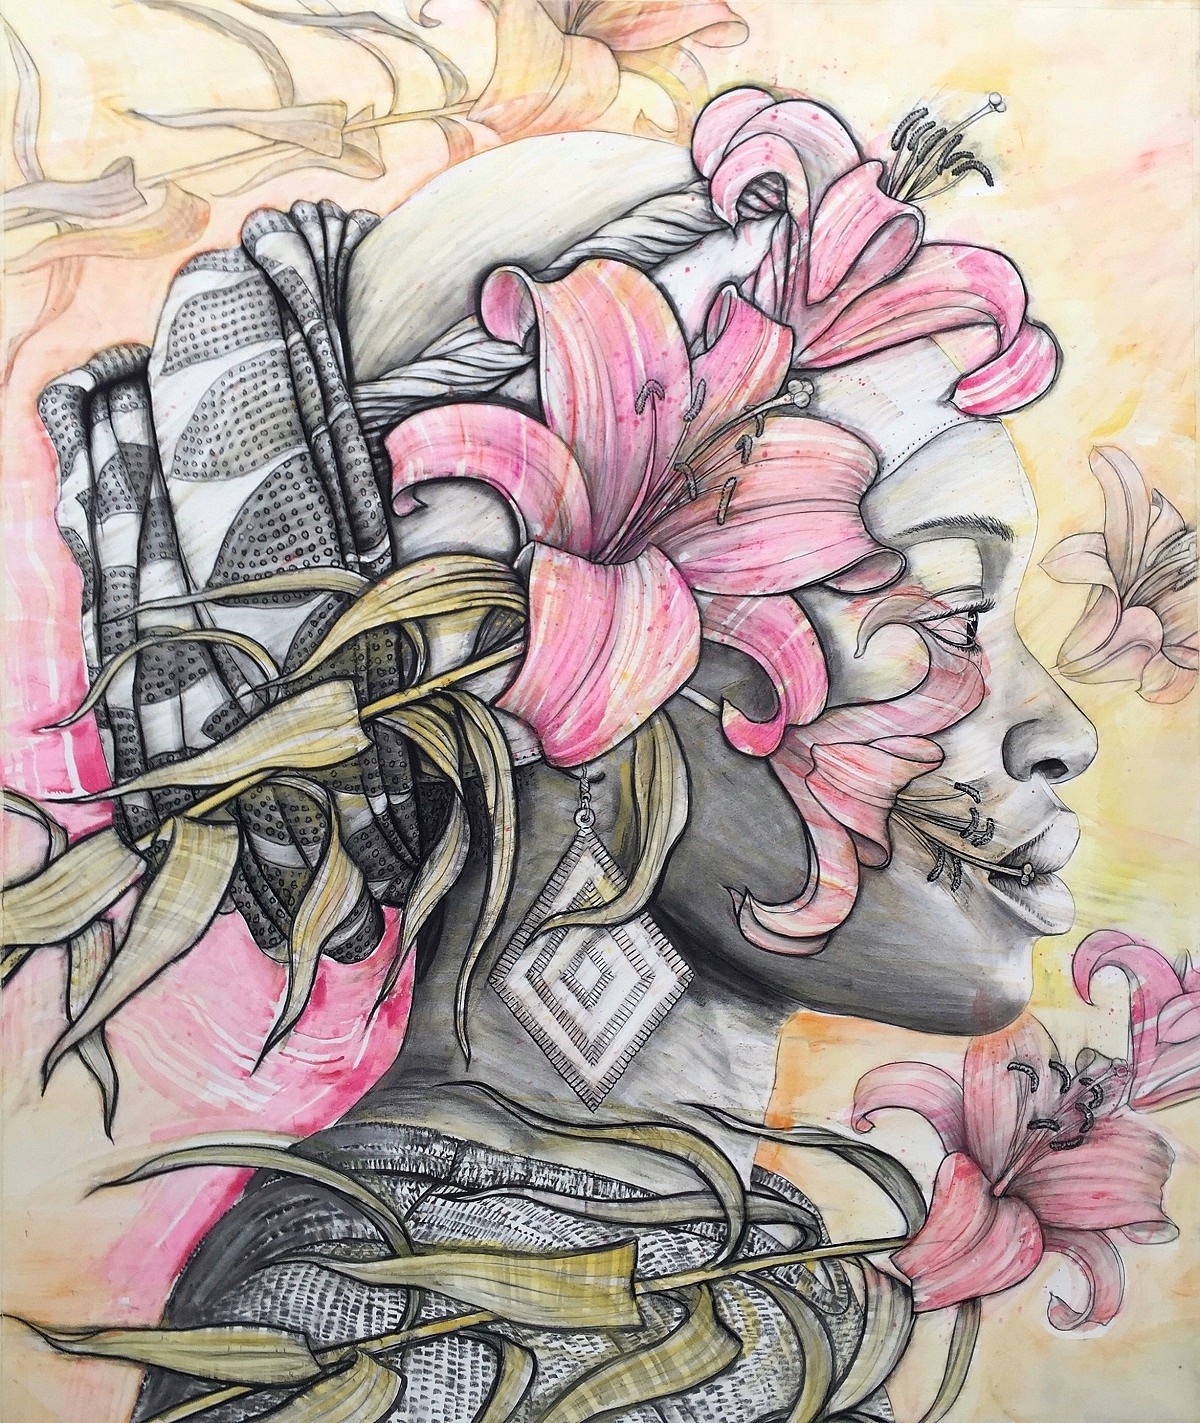 21 annunciation leticia with pink lillies 180 x 132 chalk pastel and charcoal on paper